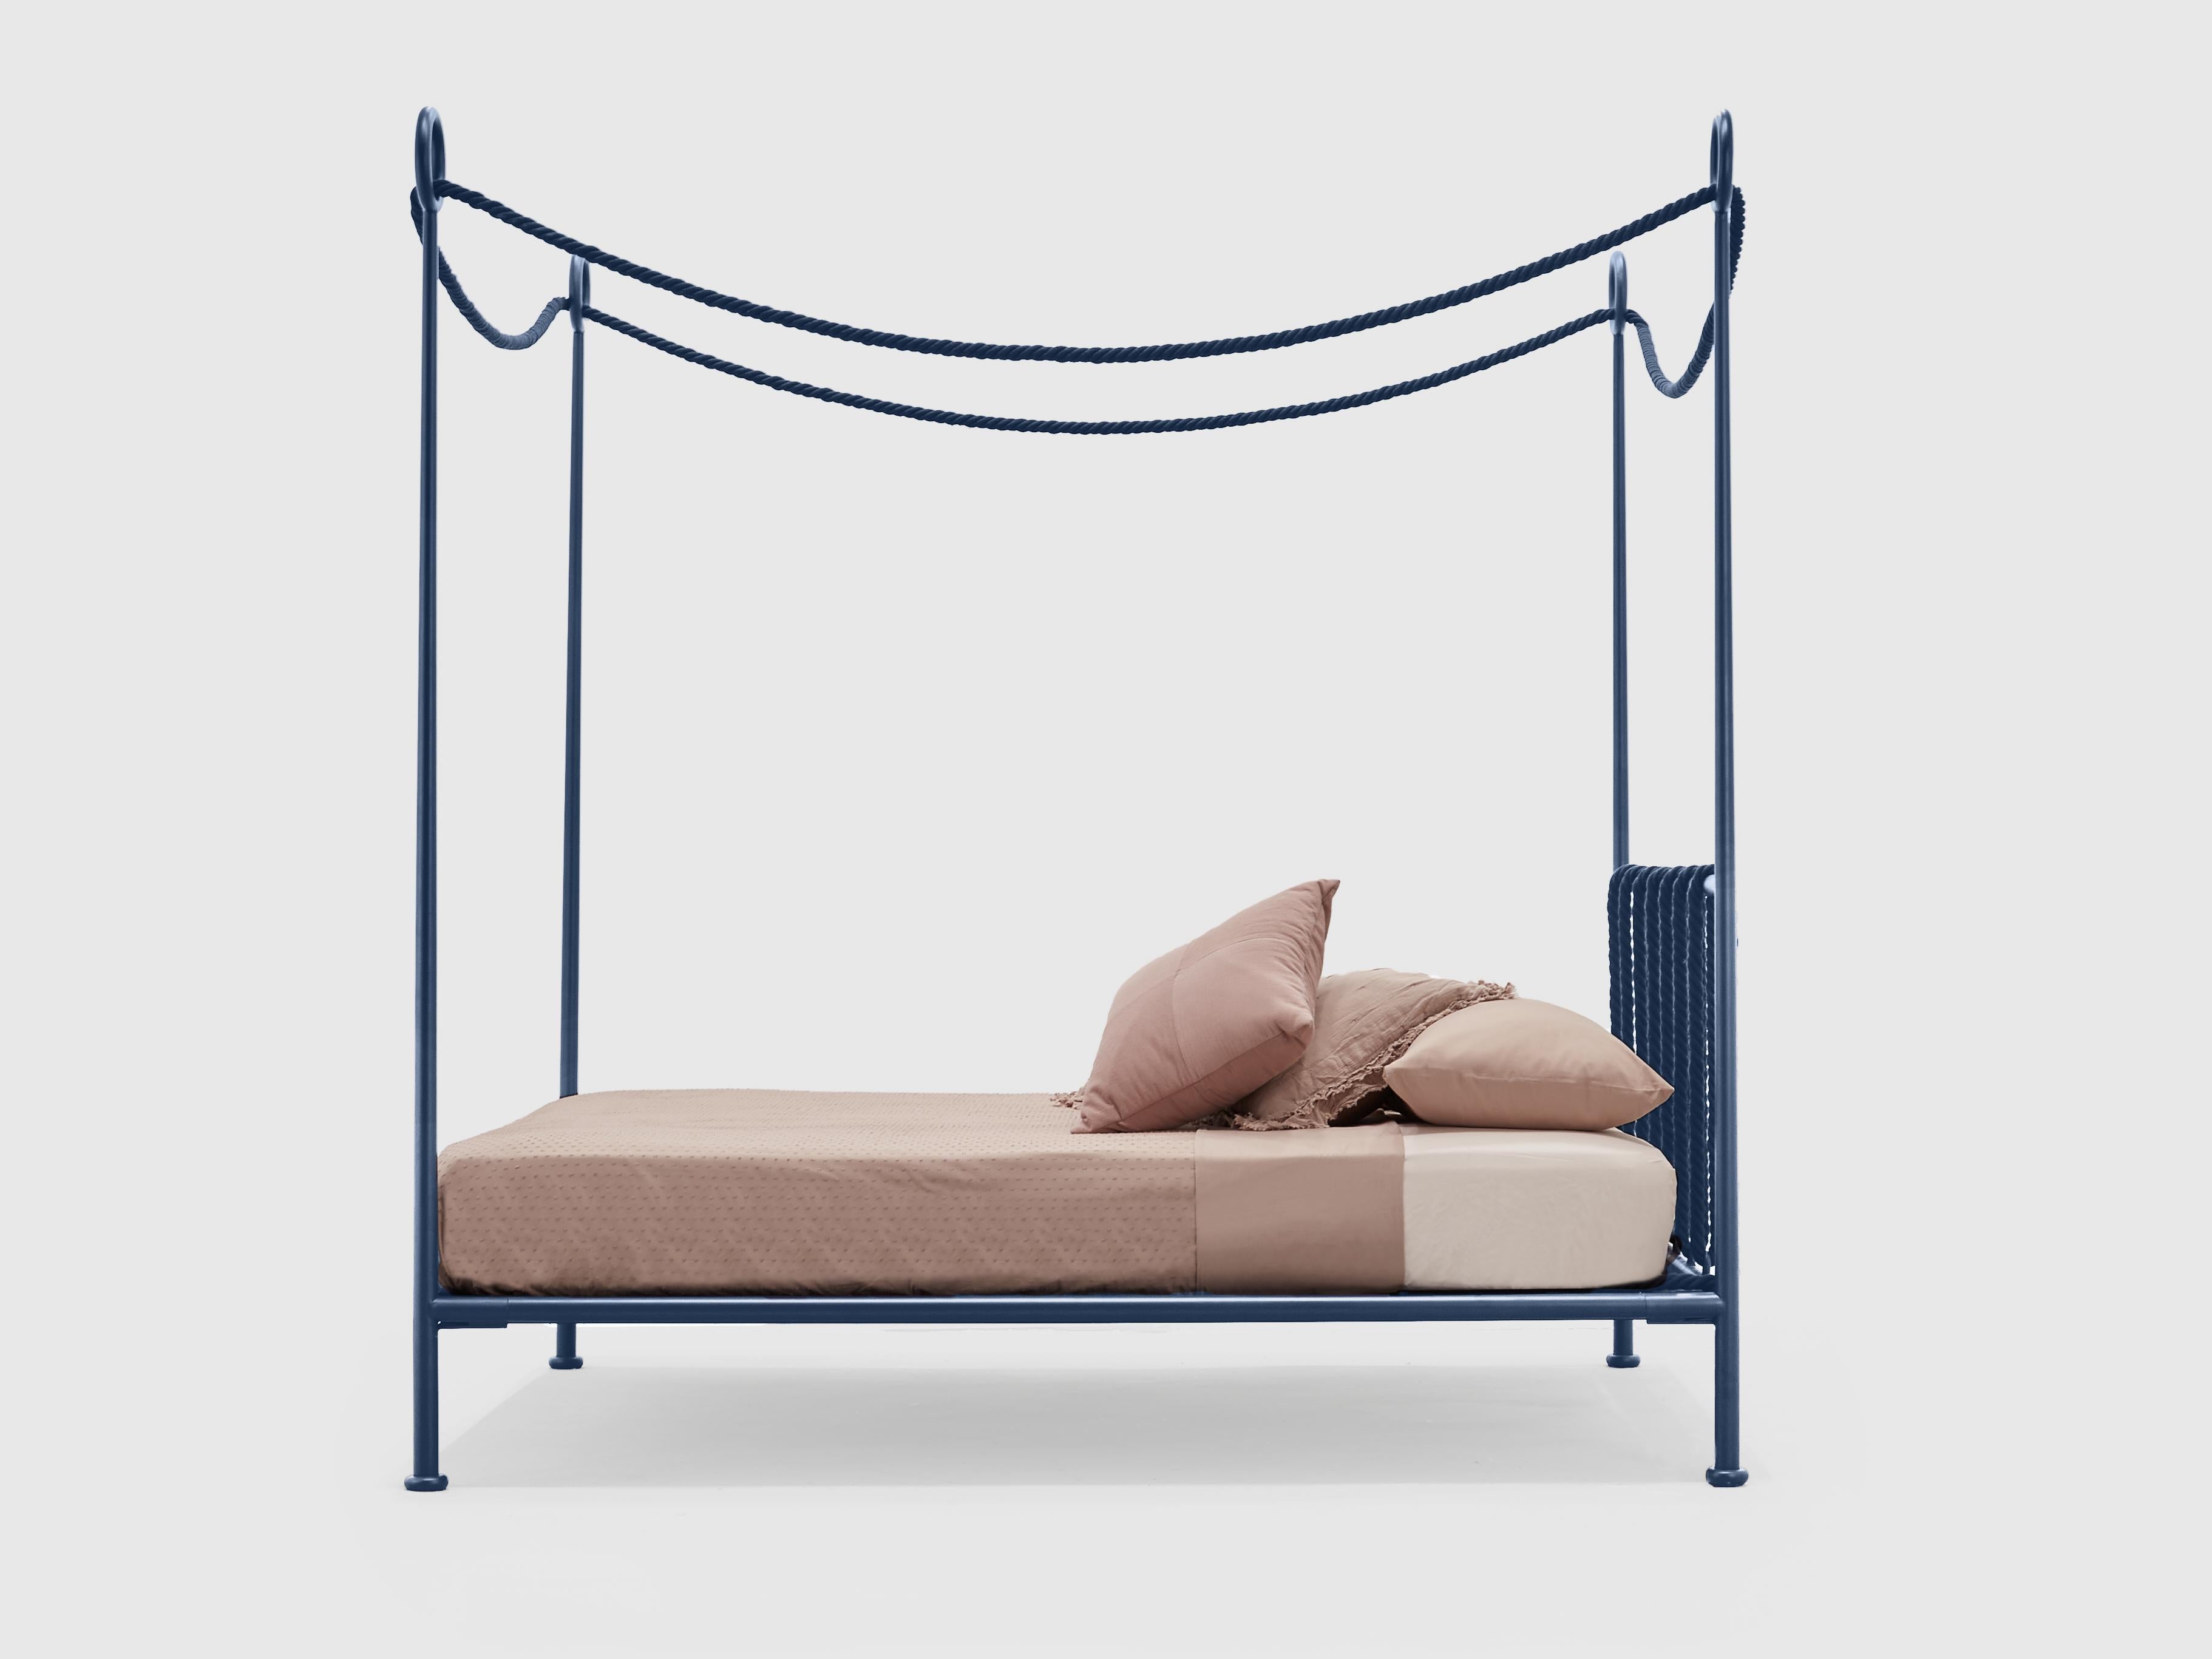 Forged Cima Canopy Bed by Sovrappensiero Design Studio For Sale